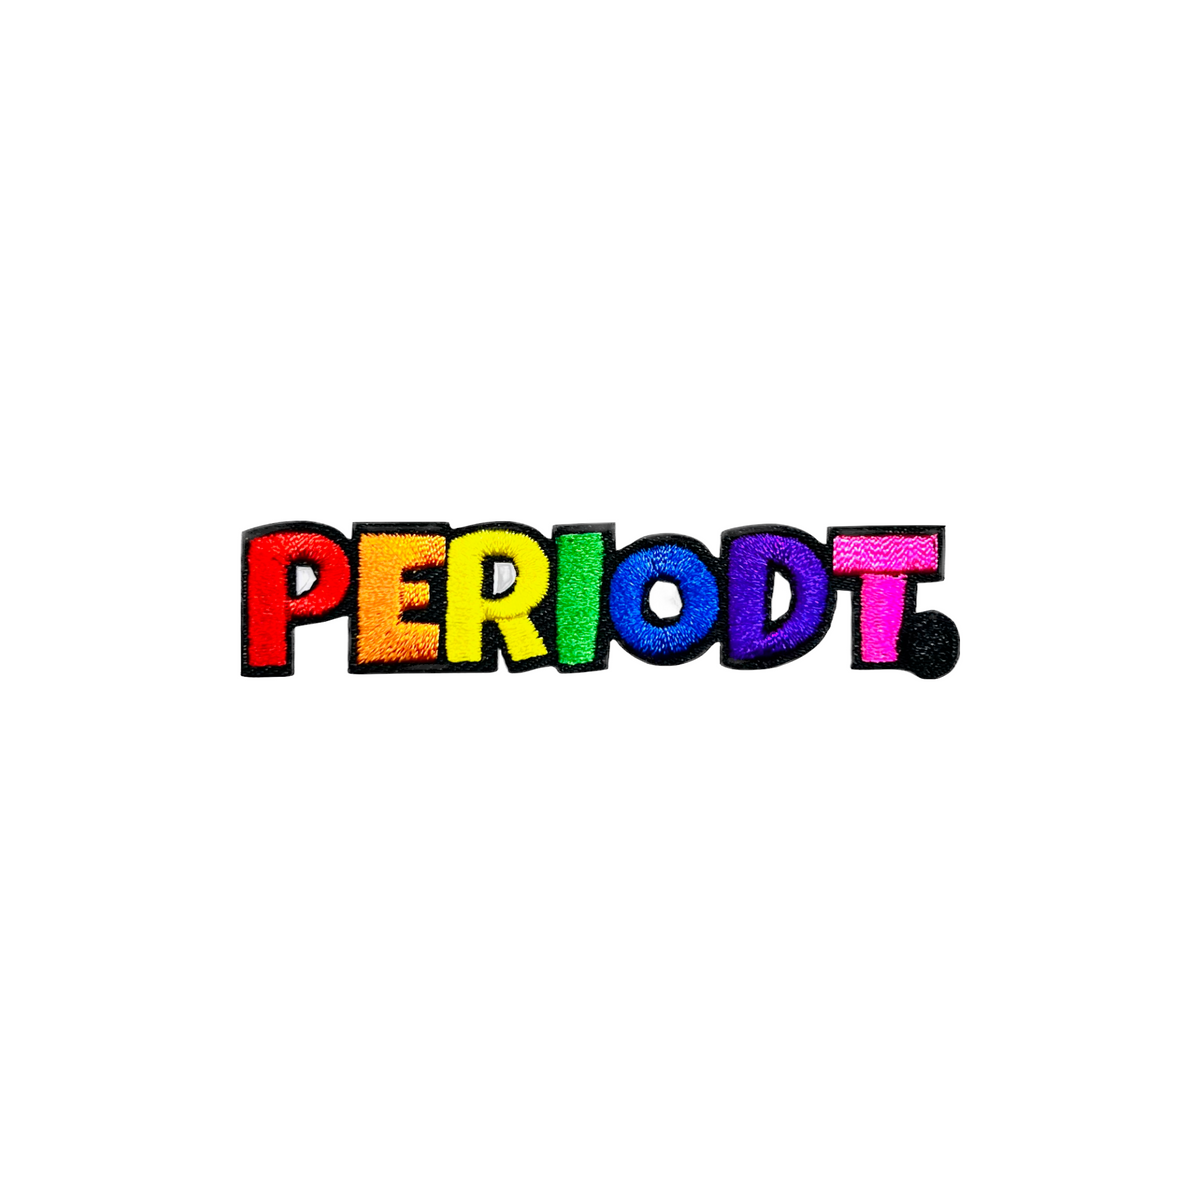 PERIODT. Embroidered Patch